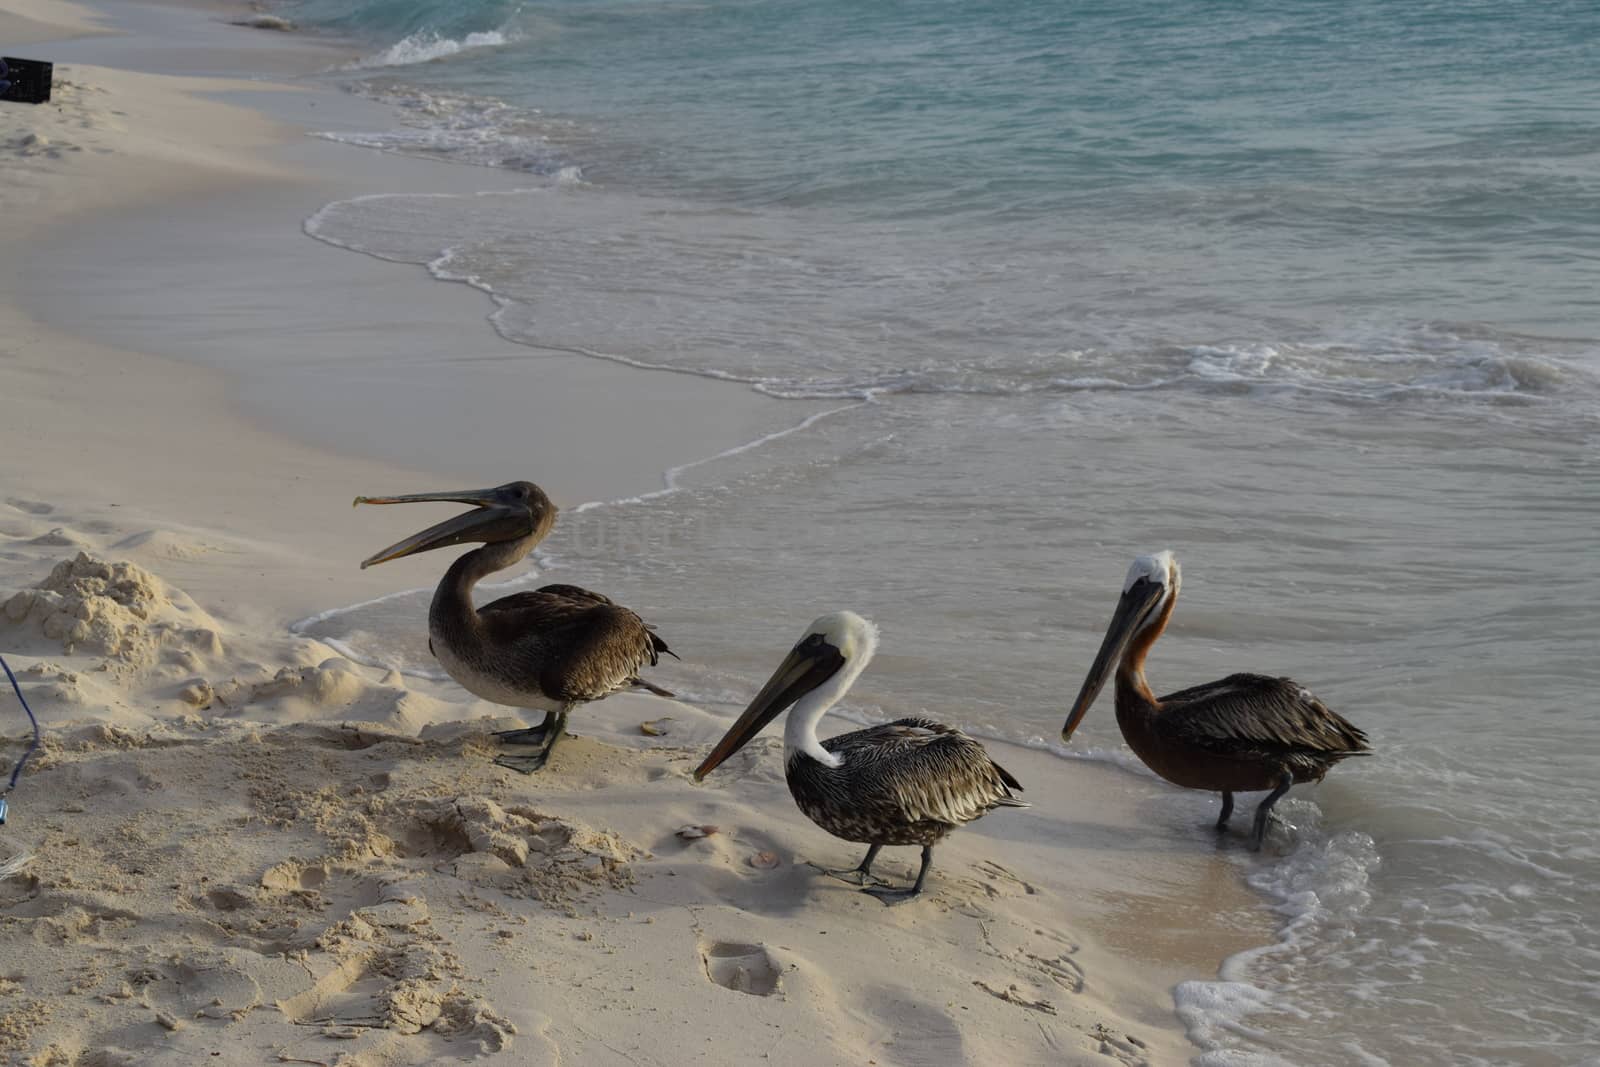 Seagulls are waiting on the beach to receive fishes from a fisherman - Aruba Island